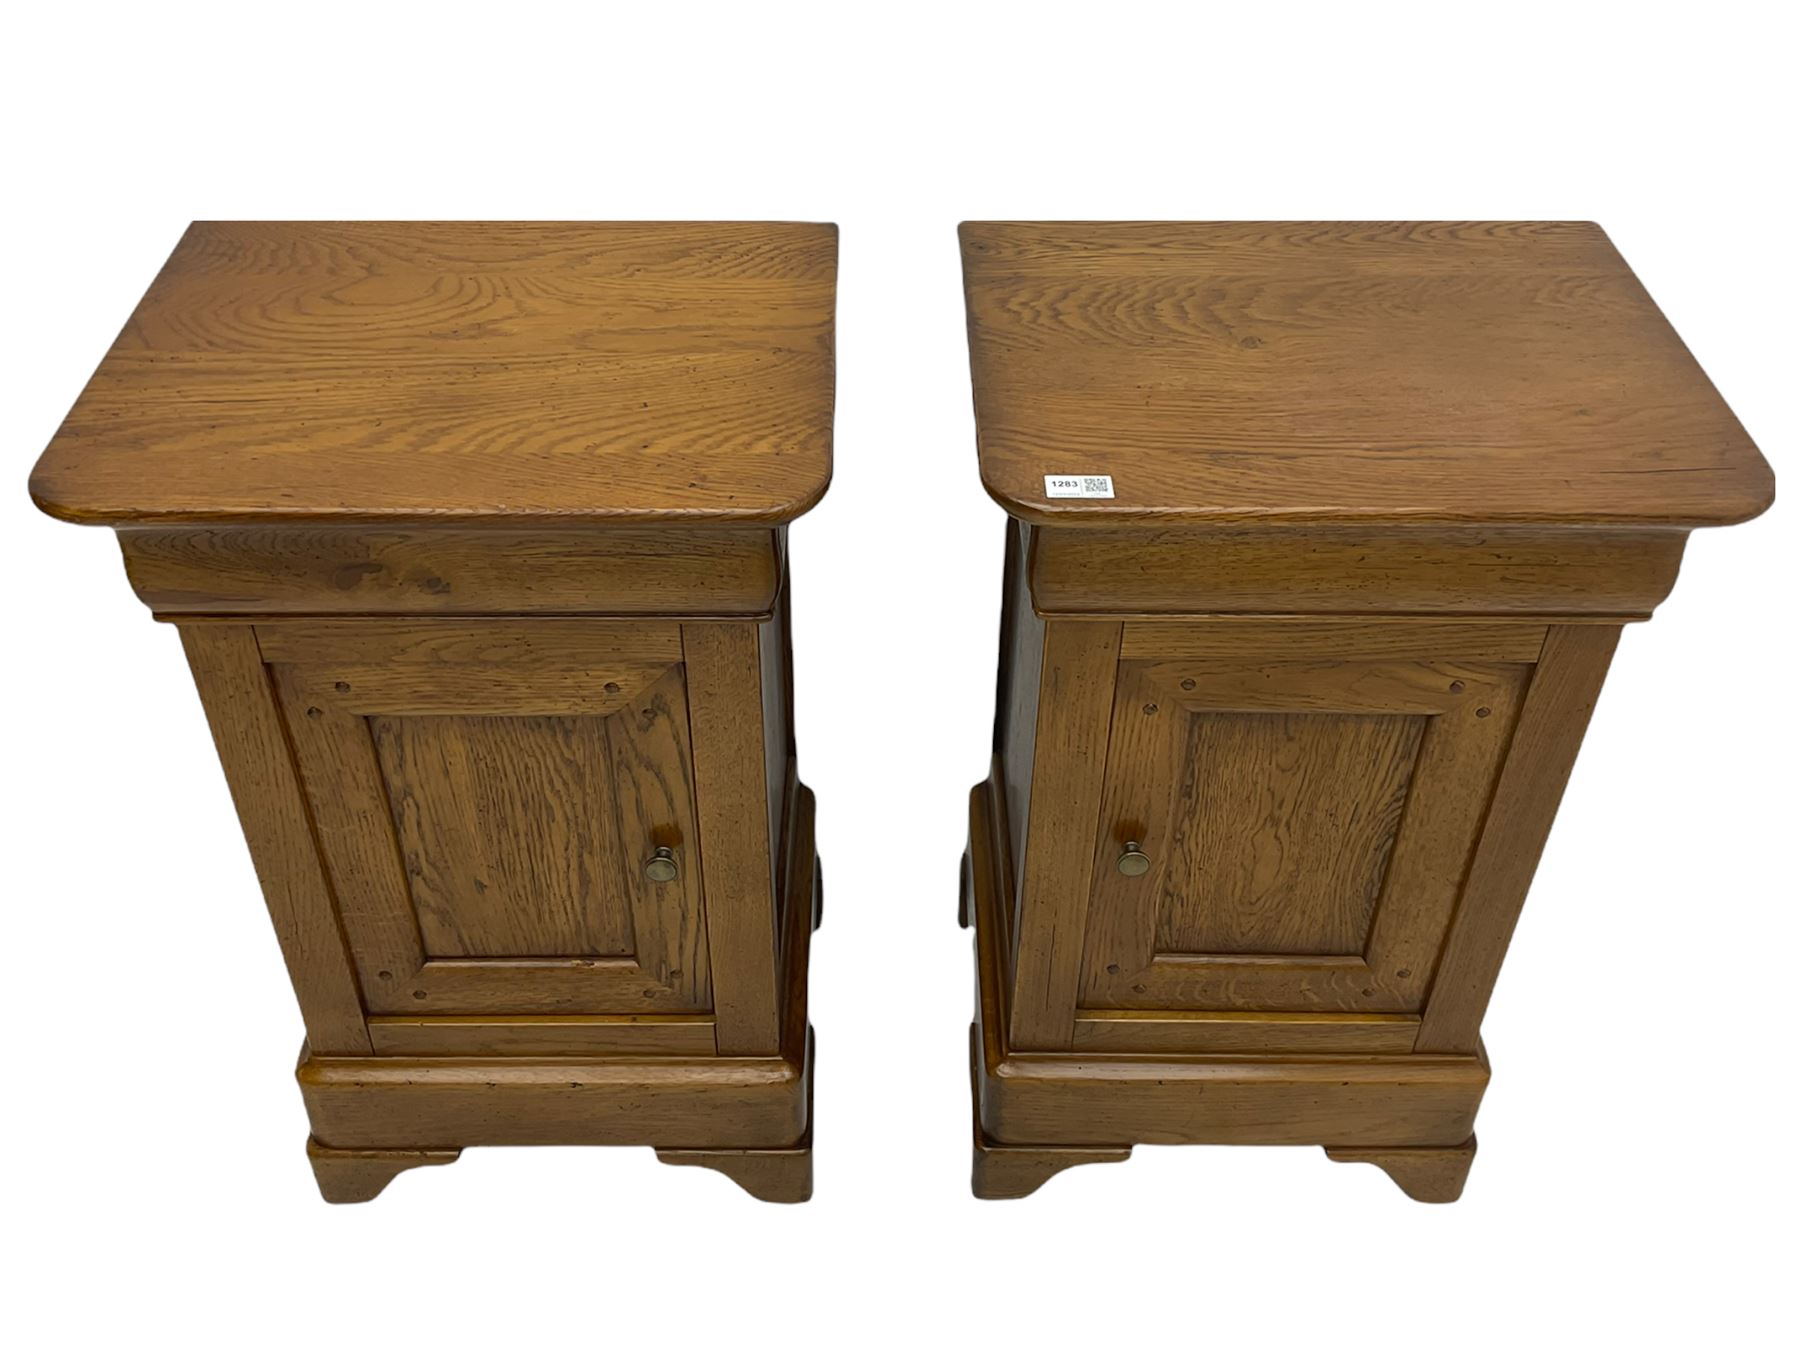 Barre Dugue - Pair of French oak bedside cabinets - Image 2 of 5